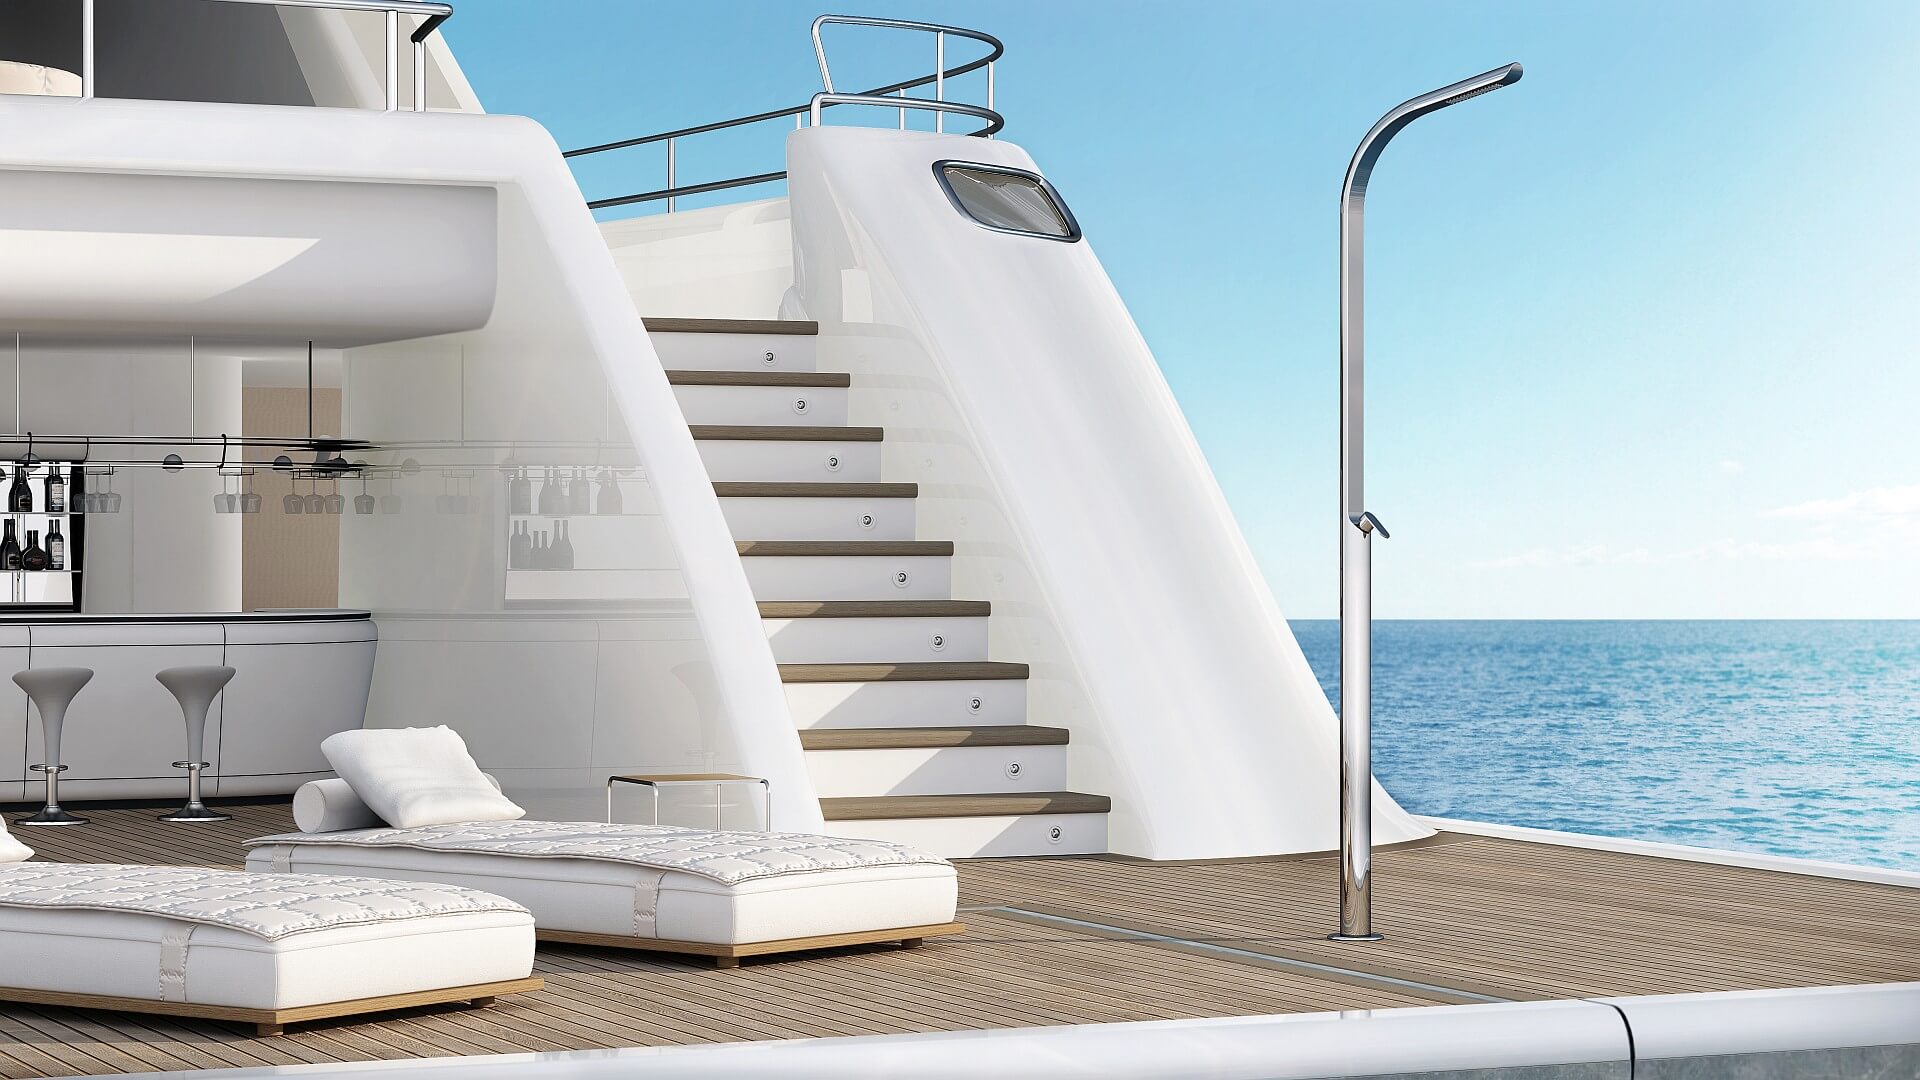 Picture Outdoor shower, pool, garden - Dream Yacht Inoxstyle